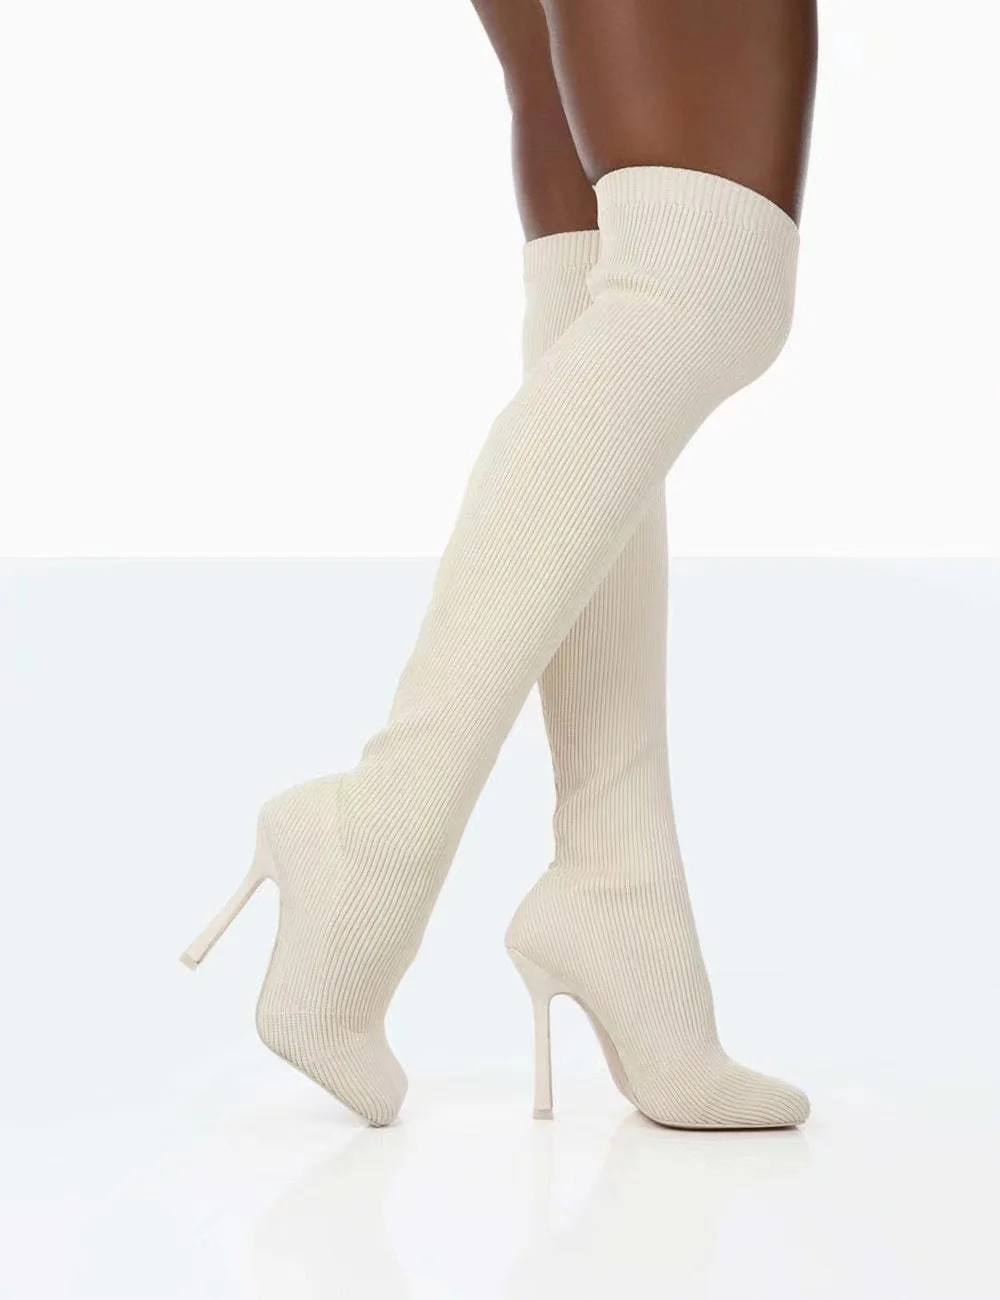 Breakj Autumn and Winter New Stiletto High-heeled Over-the-knee Boots Flying Woven Elastic Wool Sleeve Square Head Women's Boots